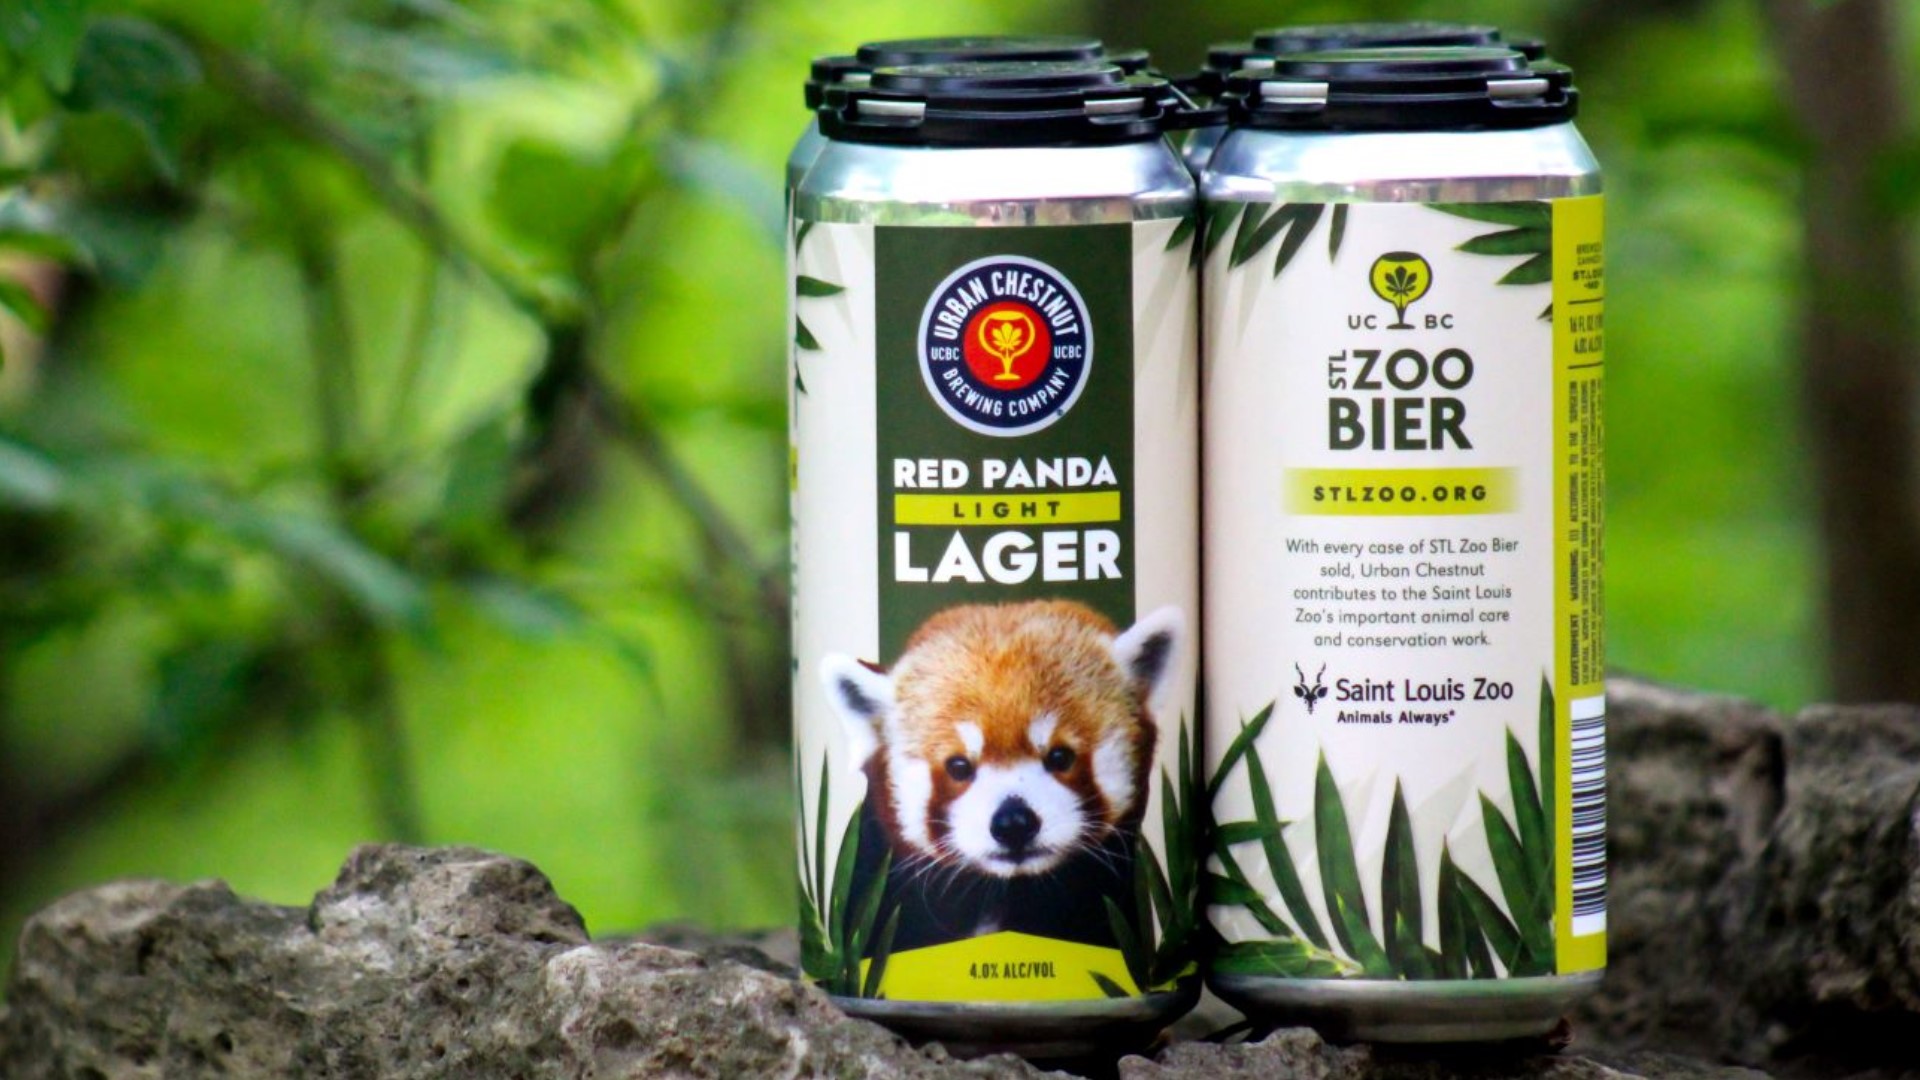 Urban Chestnut Brewing Company has partnered again with the Saint Louis Zoo on a special brew, the STL Zoo Bier Red Panda Light Lager.